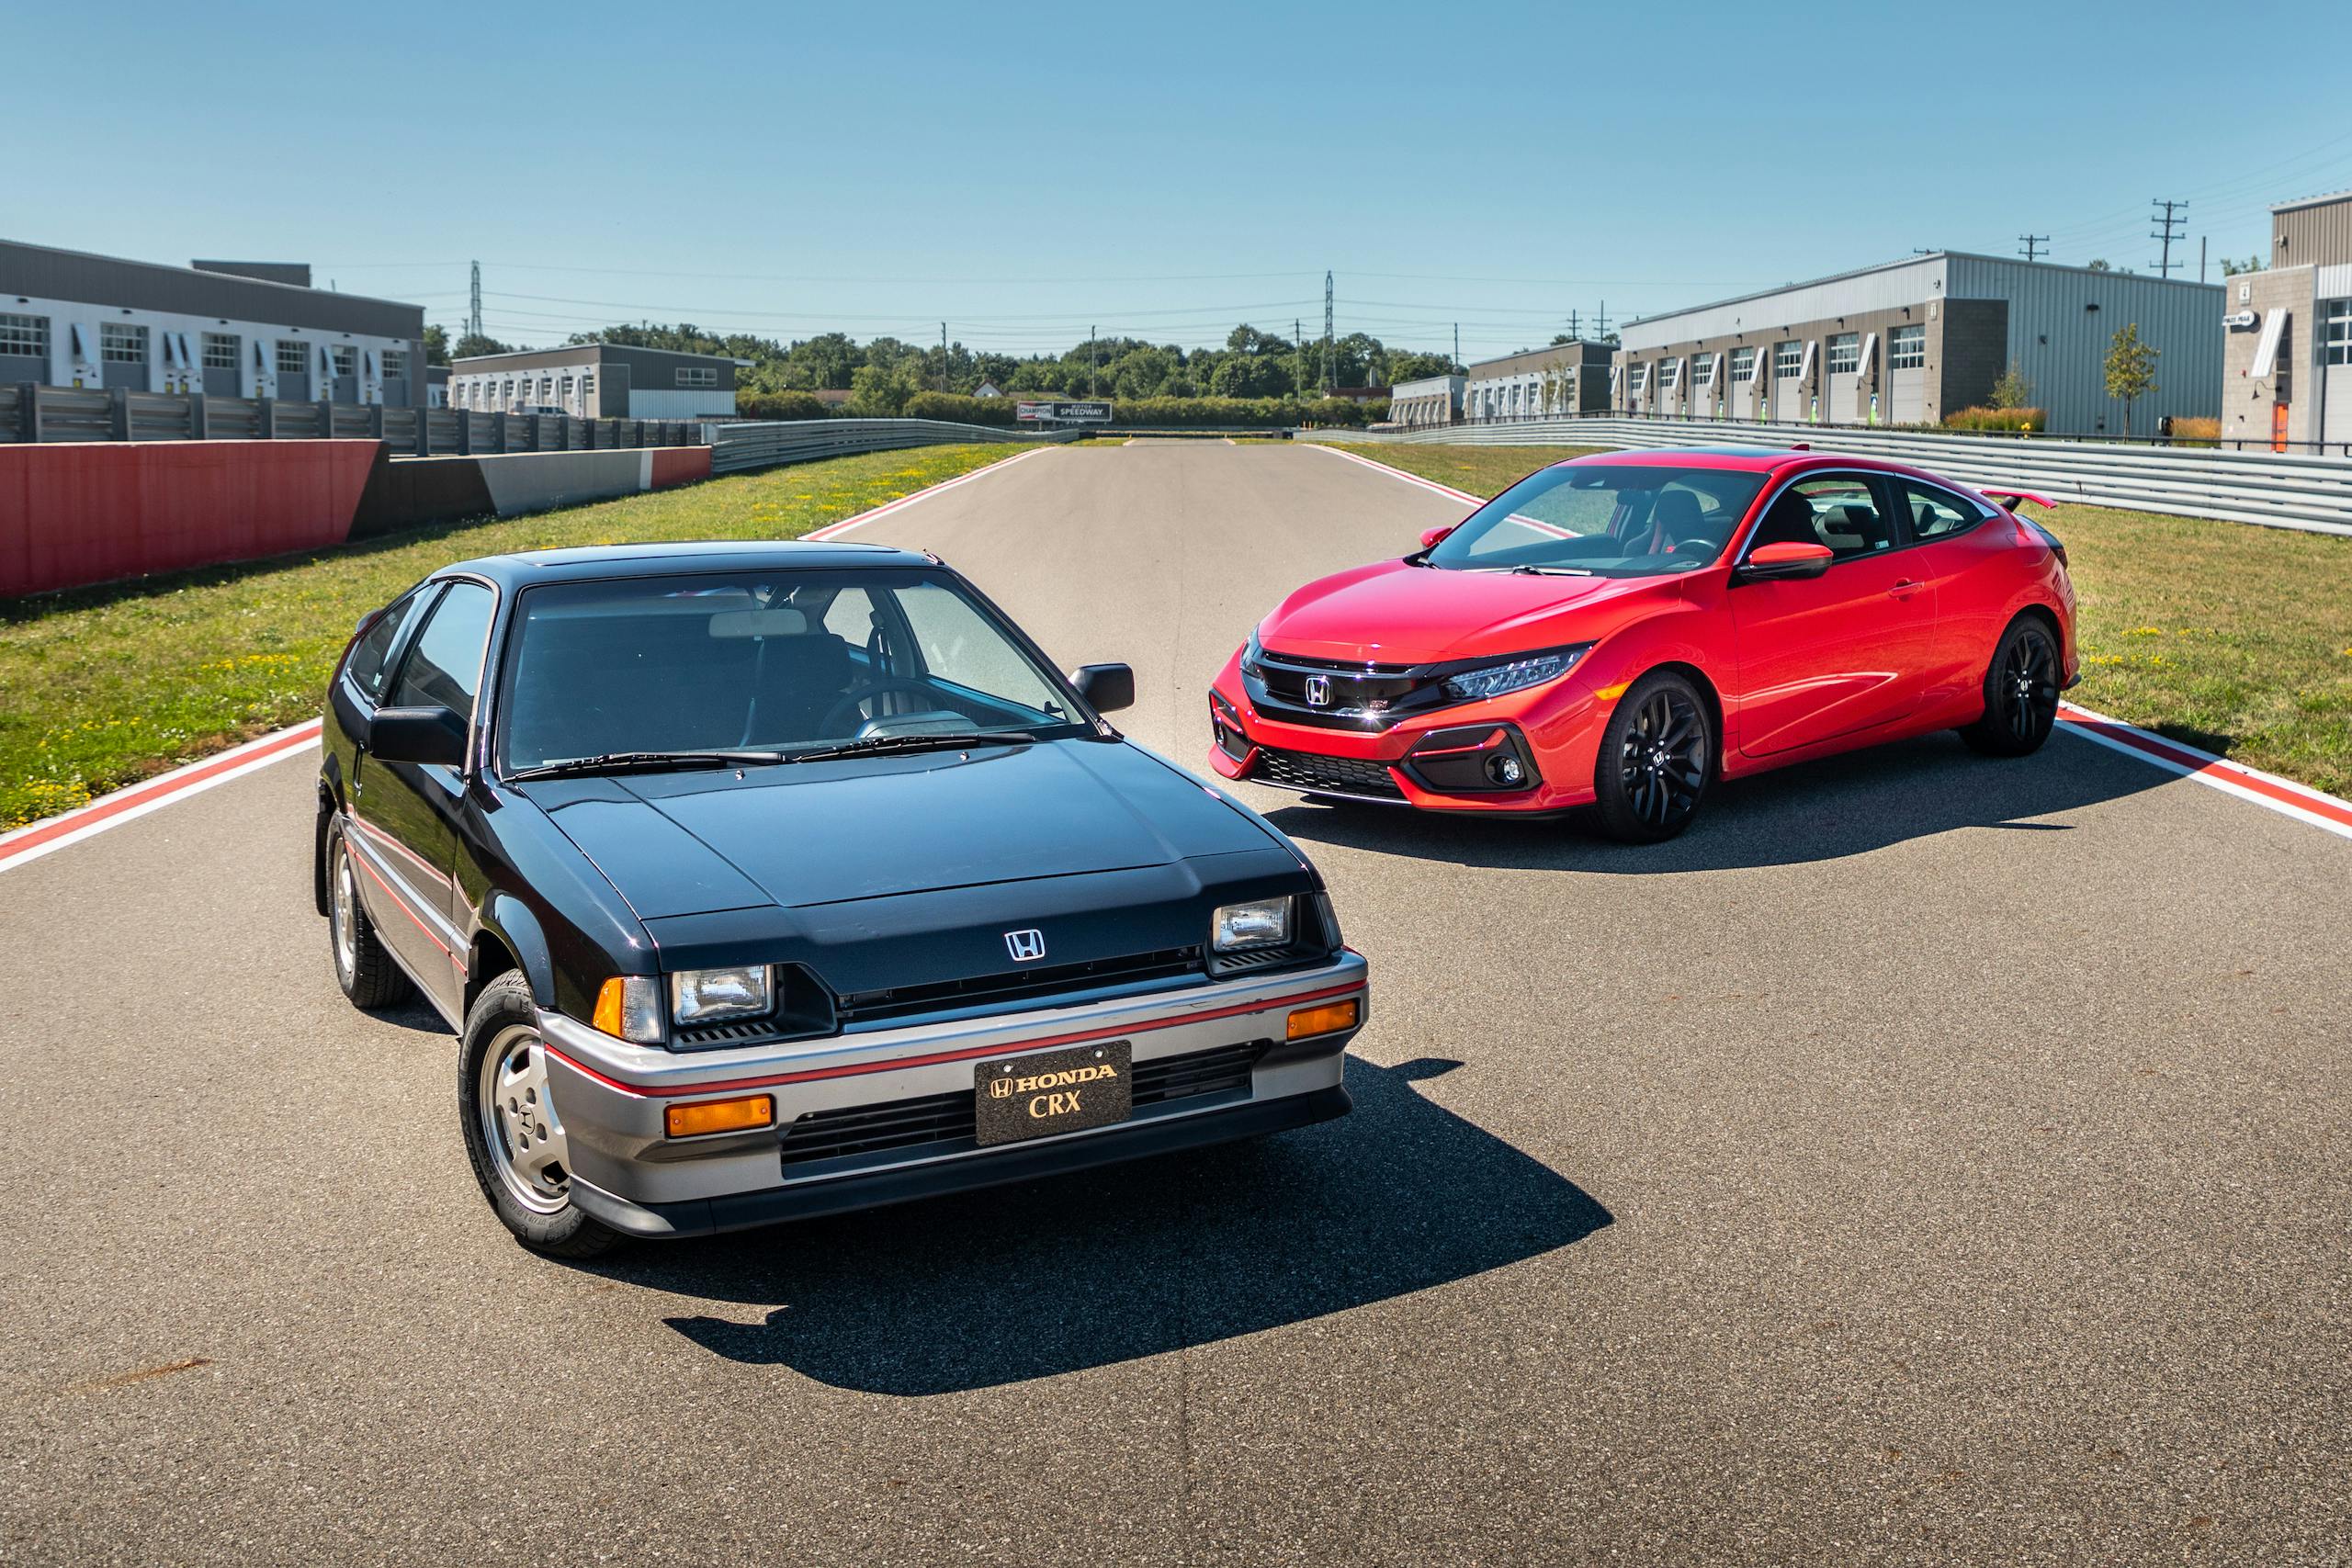 1985 CRX Si and 2020 Civic Si